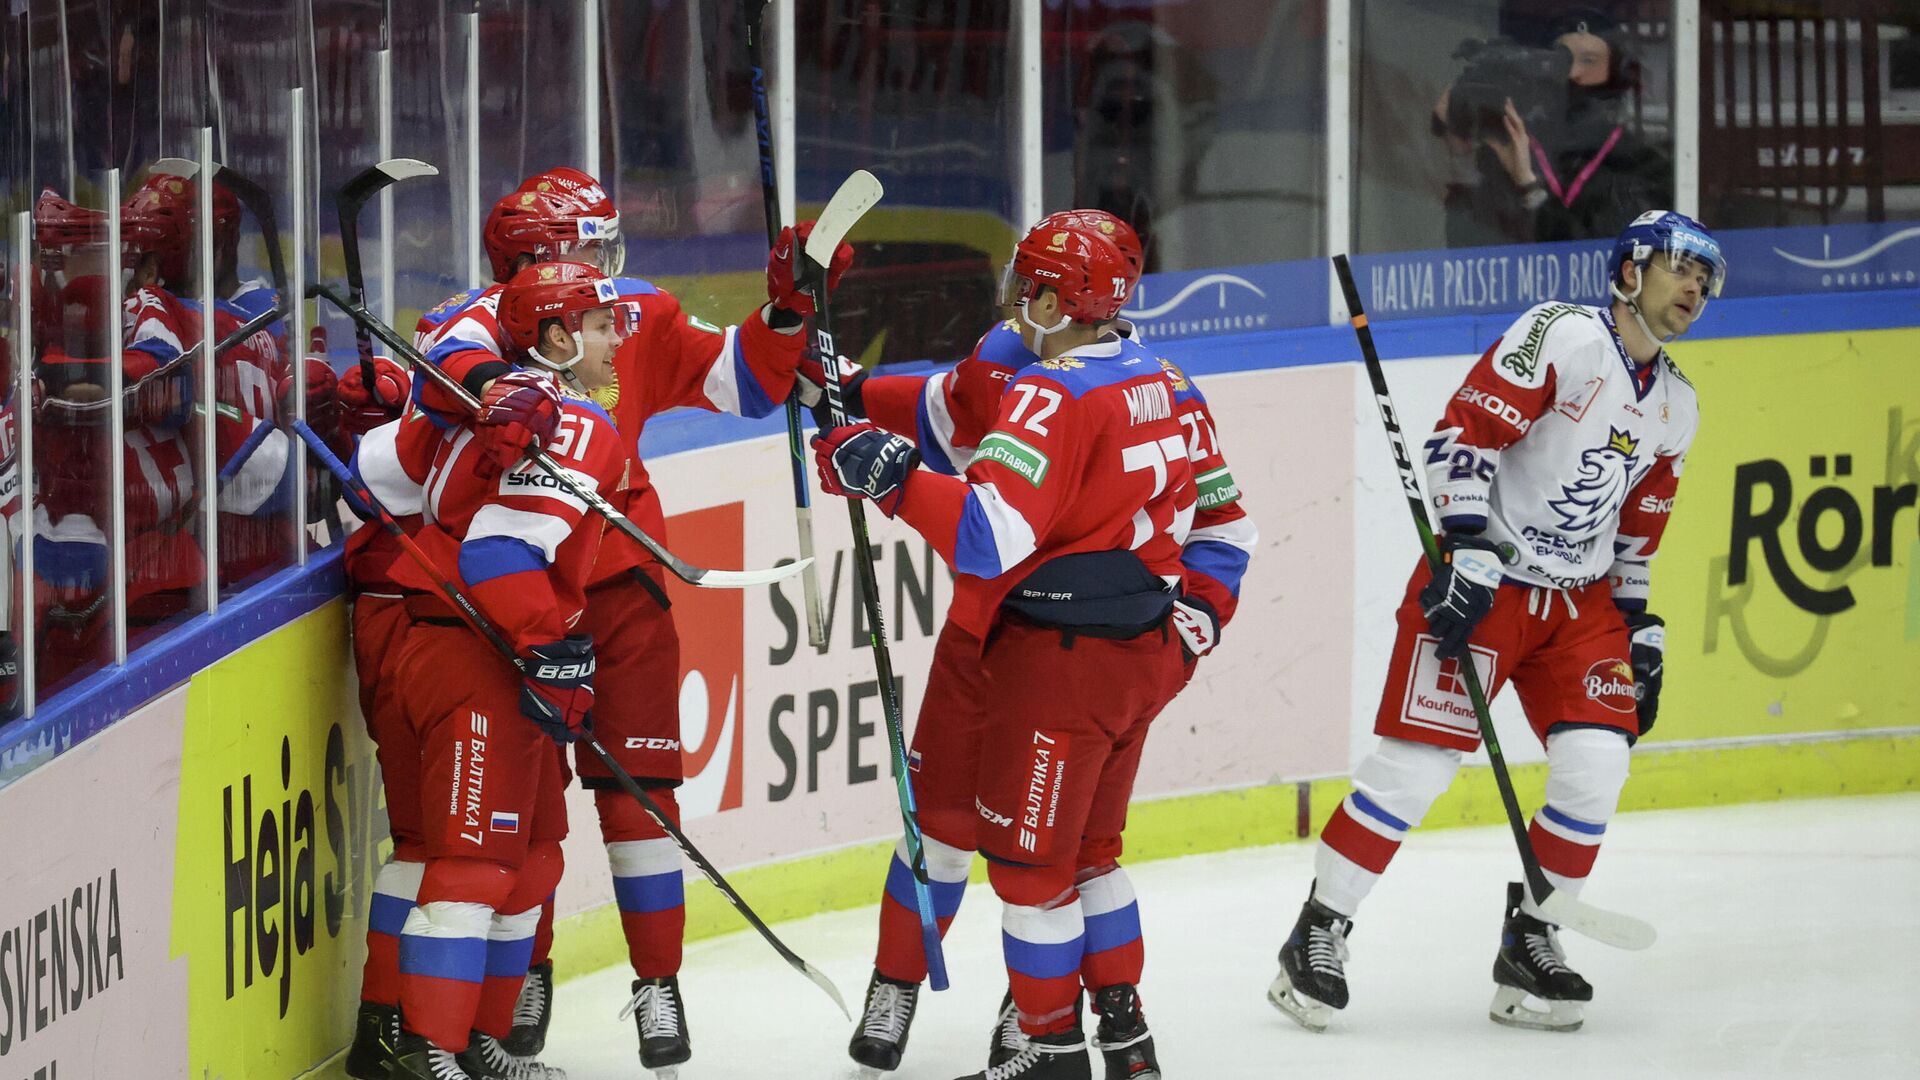 Ice Hockey - Beijer Hockey Games - Russia v Czech Republic - Malmo Arena, Malmo, Sweden - February 14, 2021 Russia's Nikolai Kovalenko celebrates scoring with teammates TT News Agency via REUTERS/Andreas Hillergren/tt THIS IMAGE HAS BEEN SUPPLIED BY A THIRD PARTY. IT IS DISTRIBUTED, EXACTLY AS RECEIVED BY REUTERS, AS A SERVICE TO CLIENTS. SWEDEN OUT. NO COMMERCIAL OR EDITORIAL SALES IN SWEDEN.. - РИА Новости, 1920, 14.02.2021